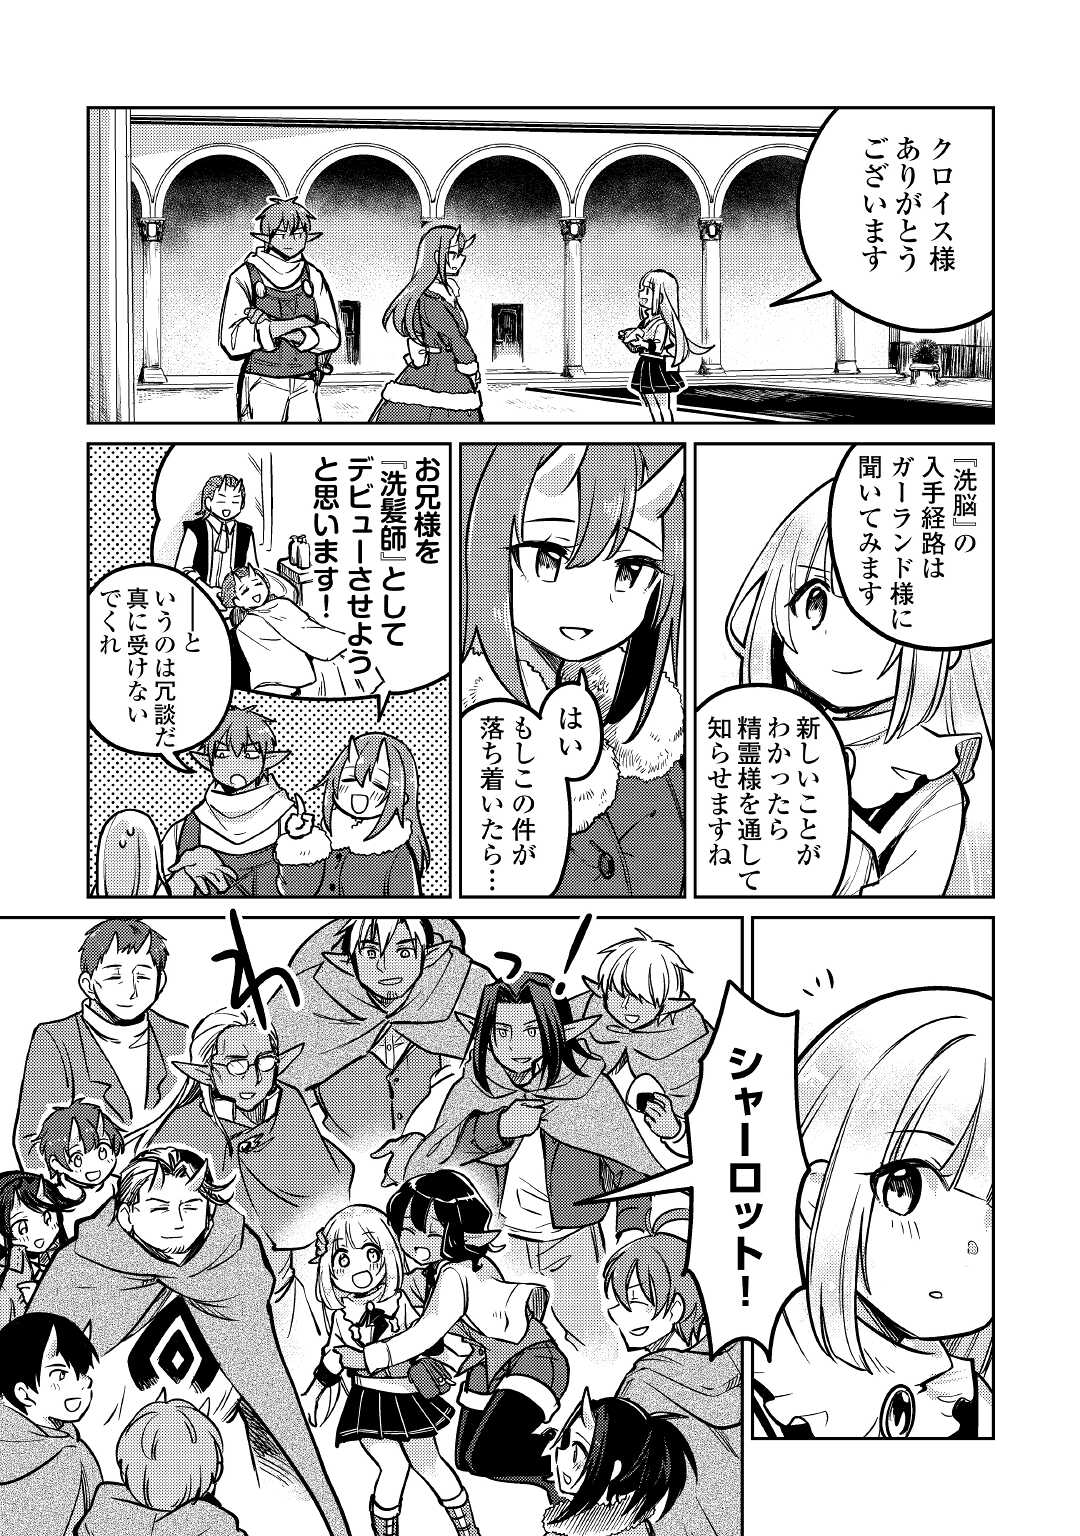 The Former Structural Researcher’s Story of Otherworldly Adventure 第41話 - Page 15